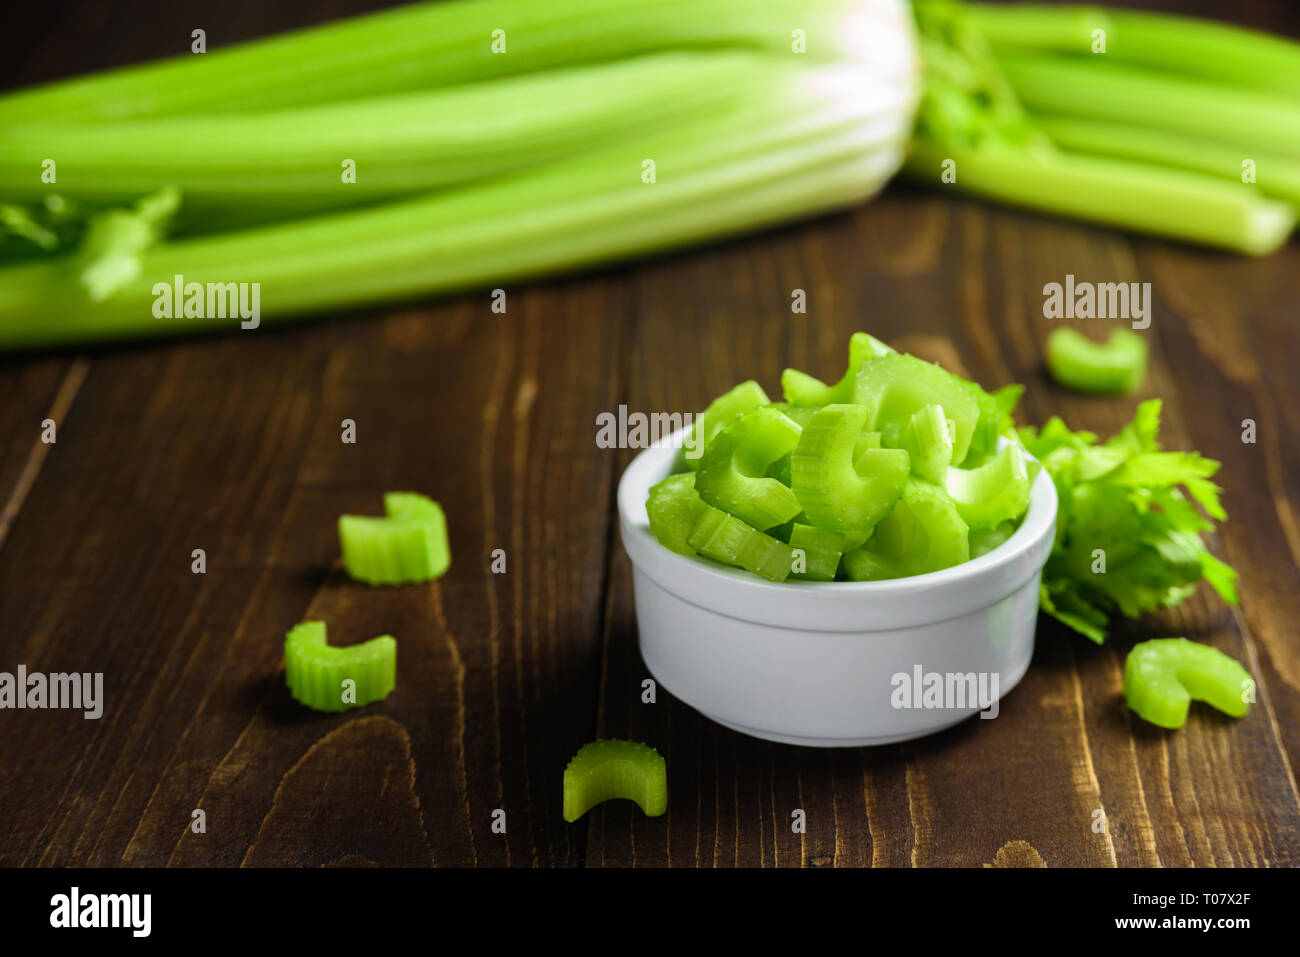 Cutted celery sticks in white ceramic bowl on wooden background Stock Photo